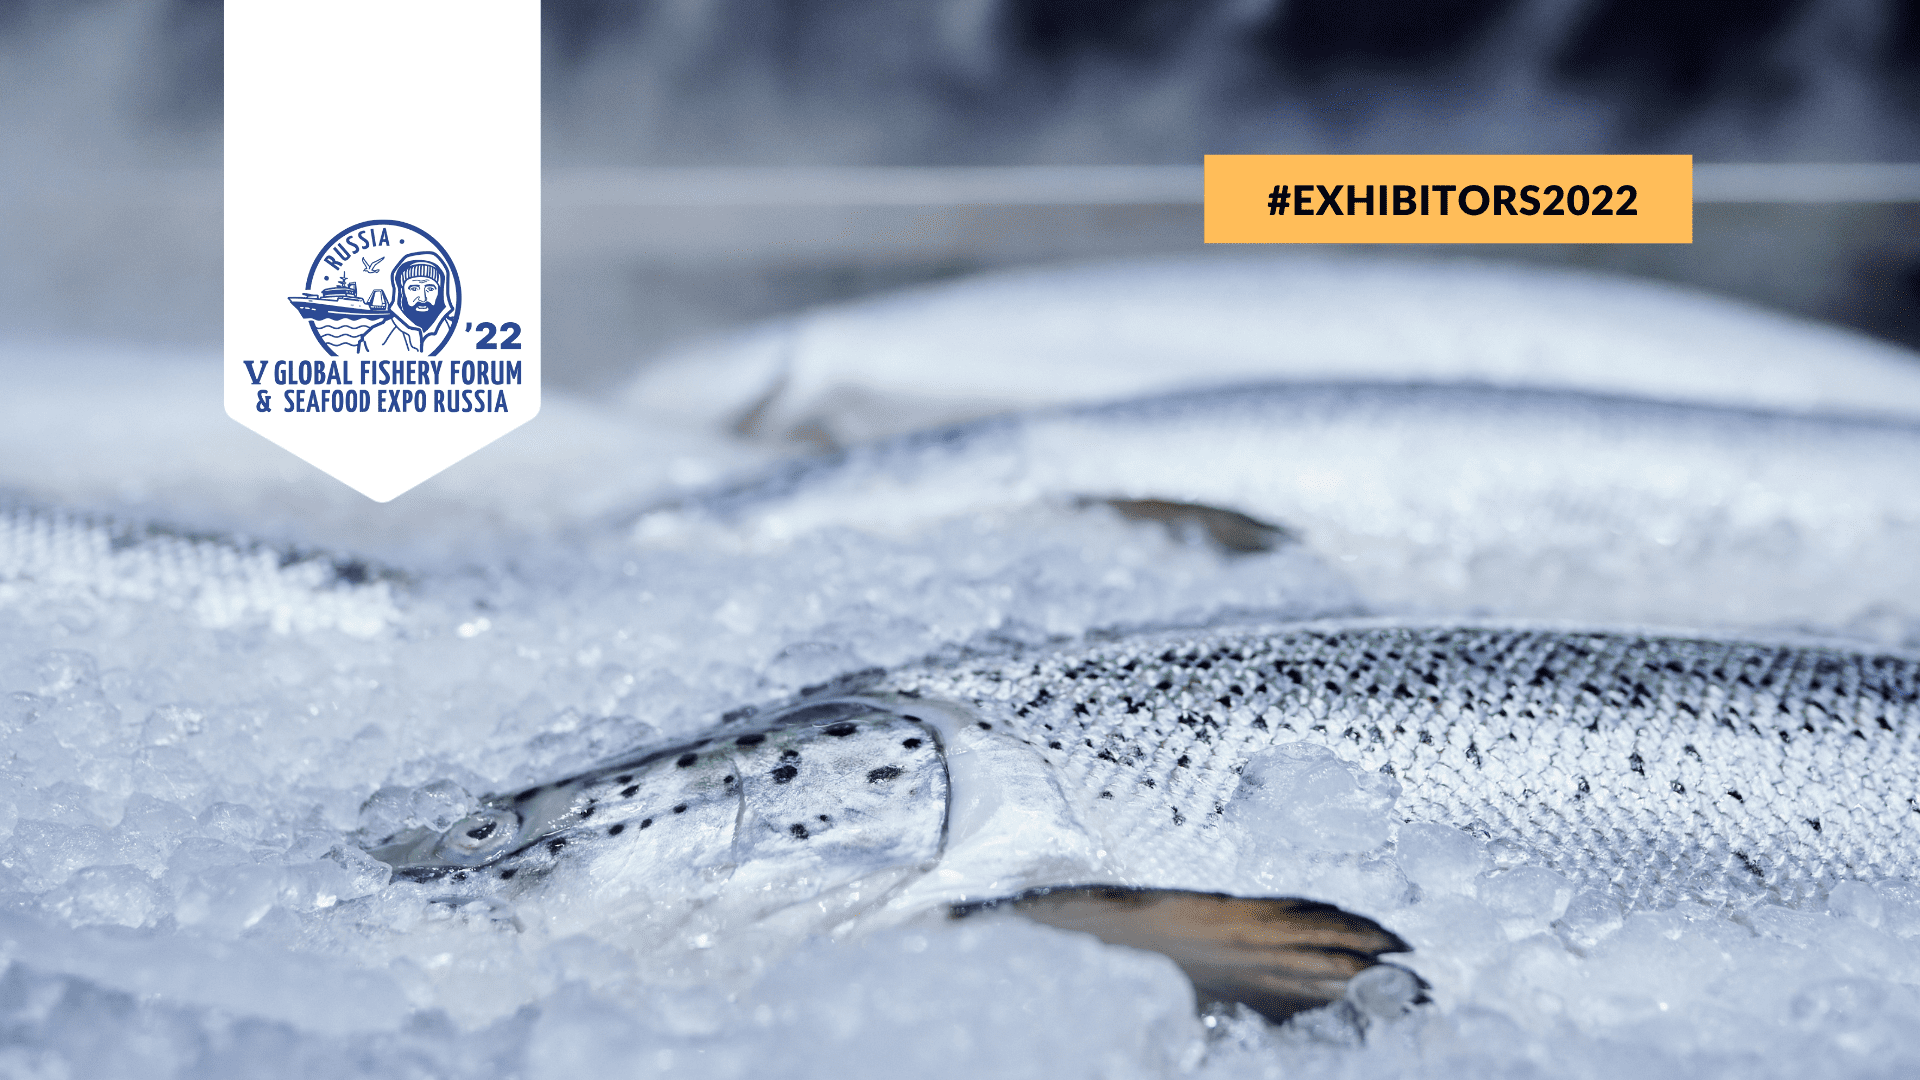 Seafood Expo Russia 2022: Overview of New Exhibitors No. 10